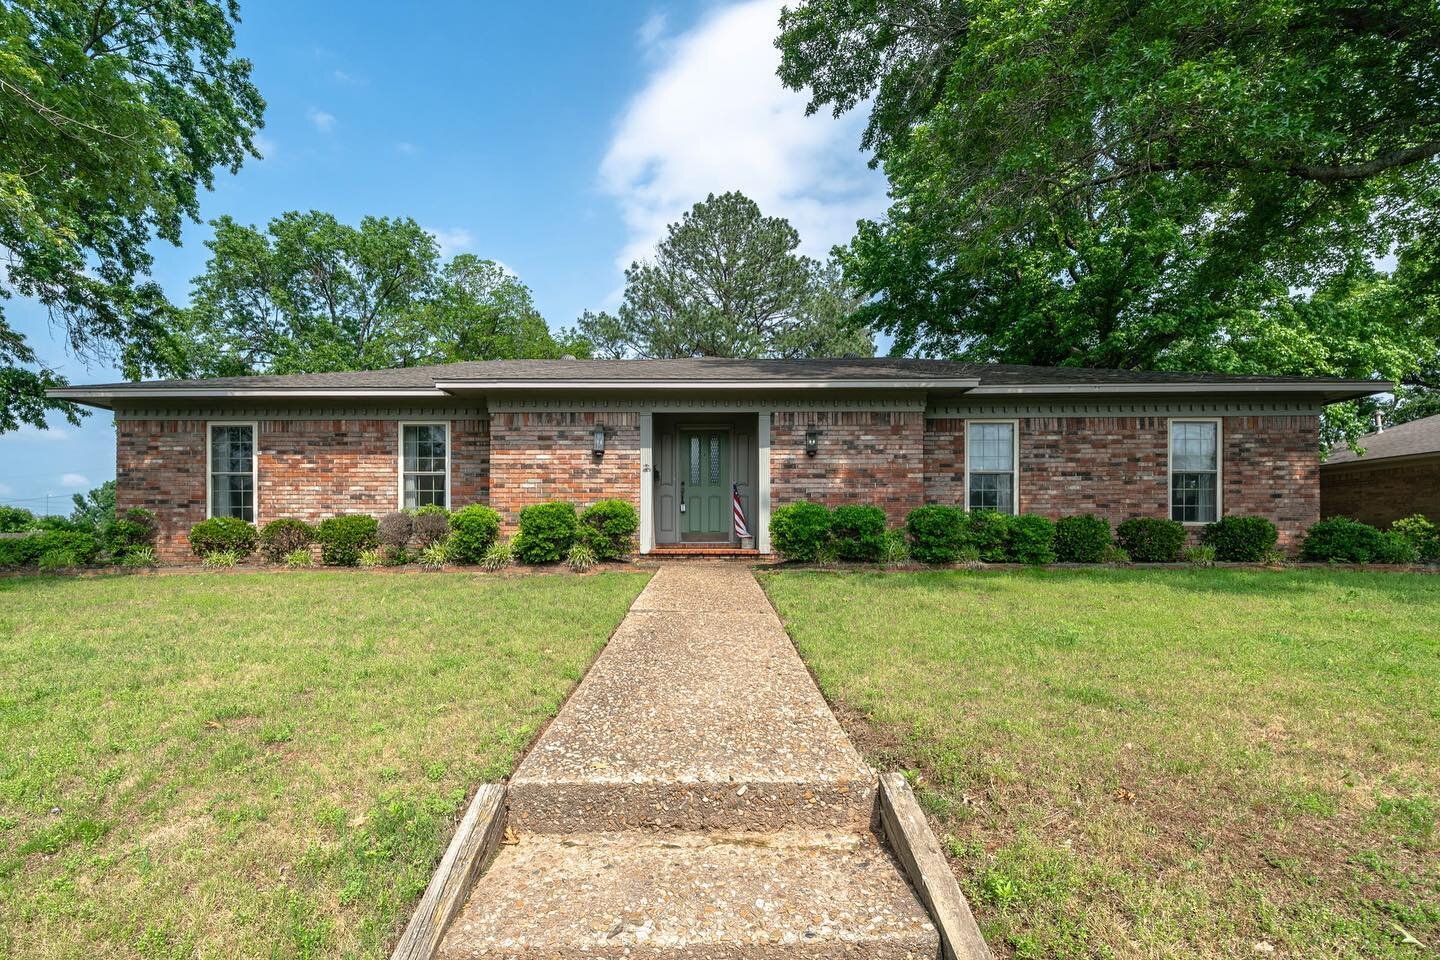 Outstanding one-owner home located in very nice neighborhood easily accessible to all area amenities. 

Listed at $368,500

Call Listing Broker Yolanda Mullins today to schedule your private showing 479-806-3608

#forsale #forsaleinvanburenar #vanbur